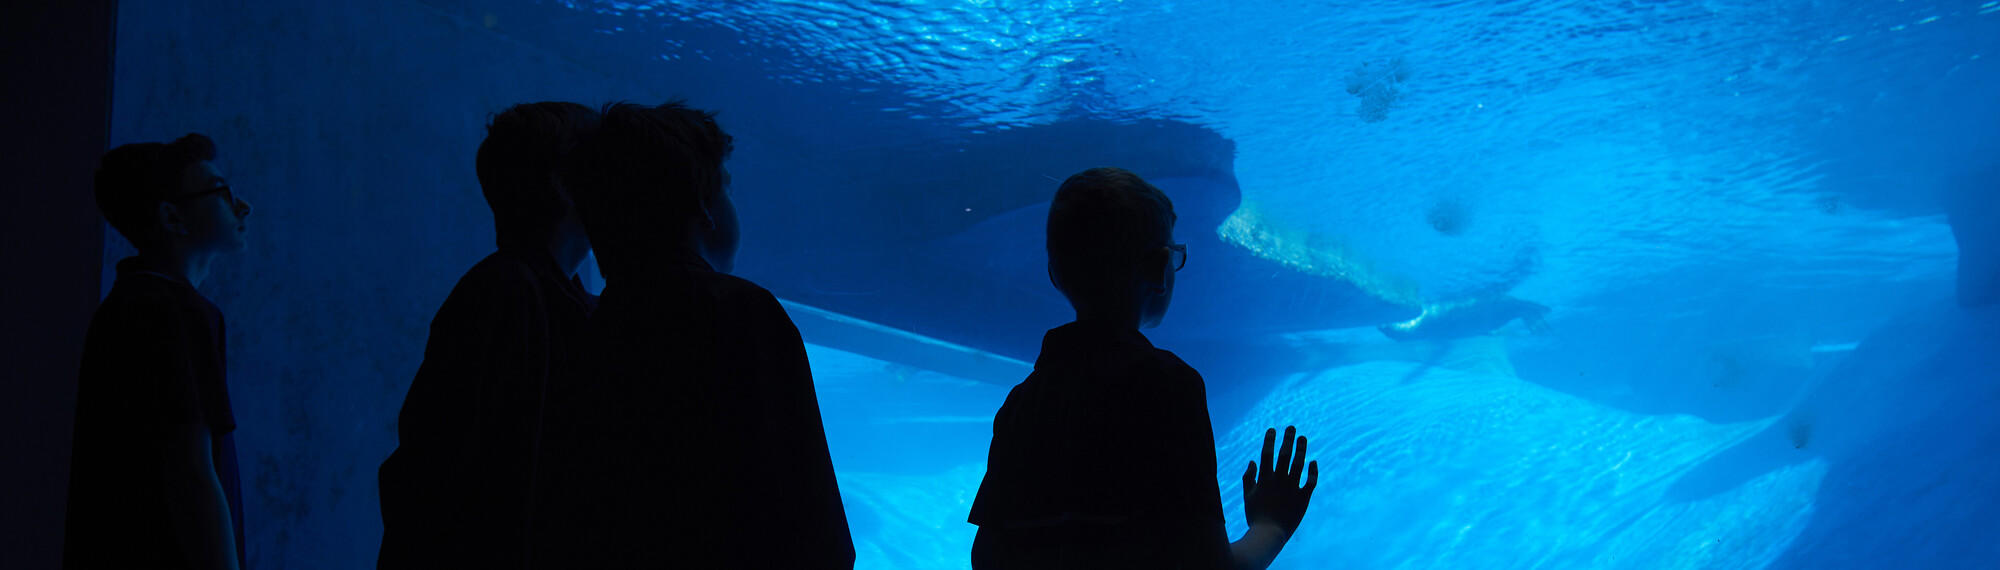 A silhouette of three students as they look into a blue tank of water with a fur seal in the swimming in the distance